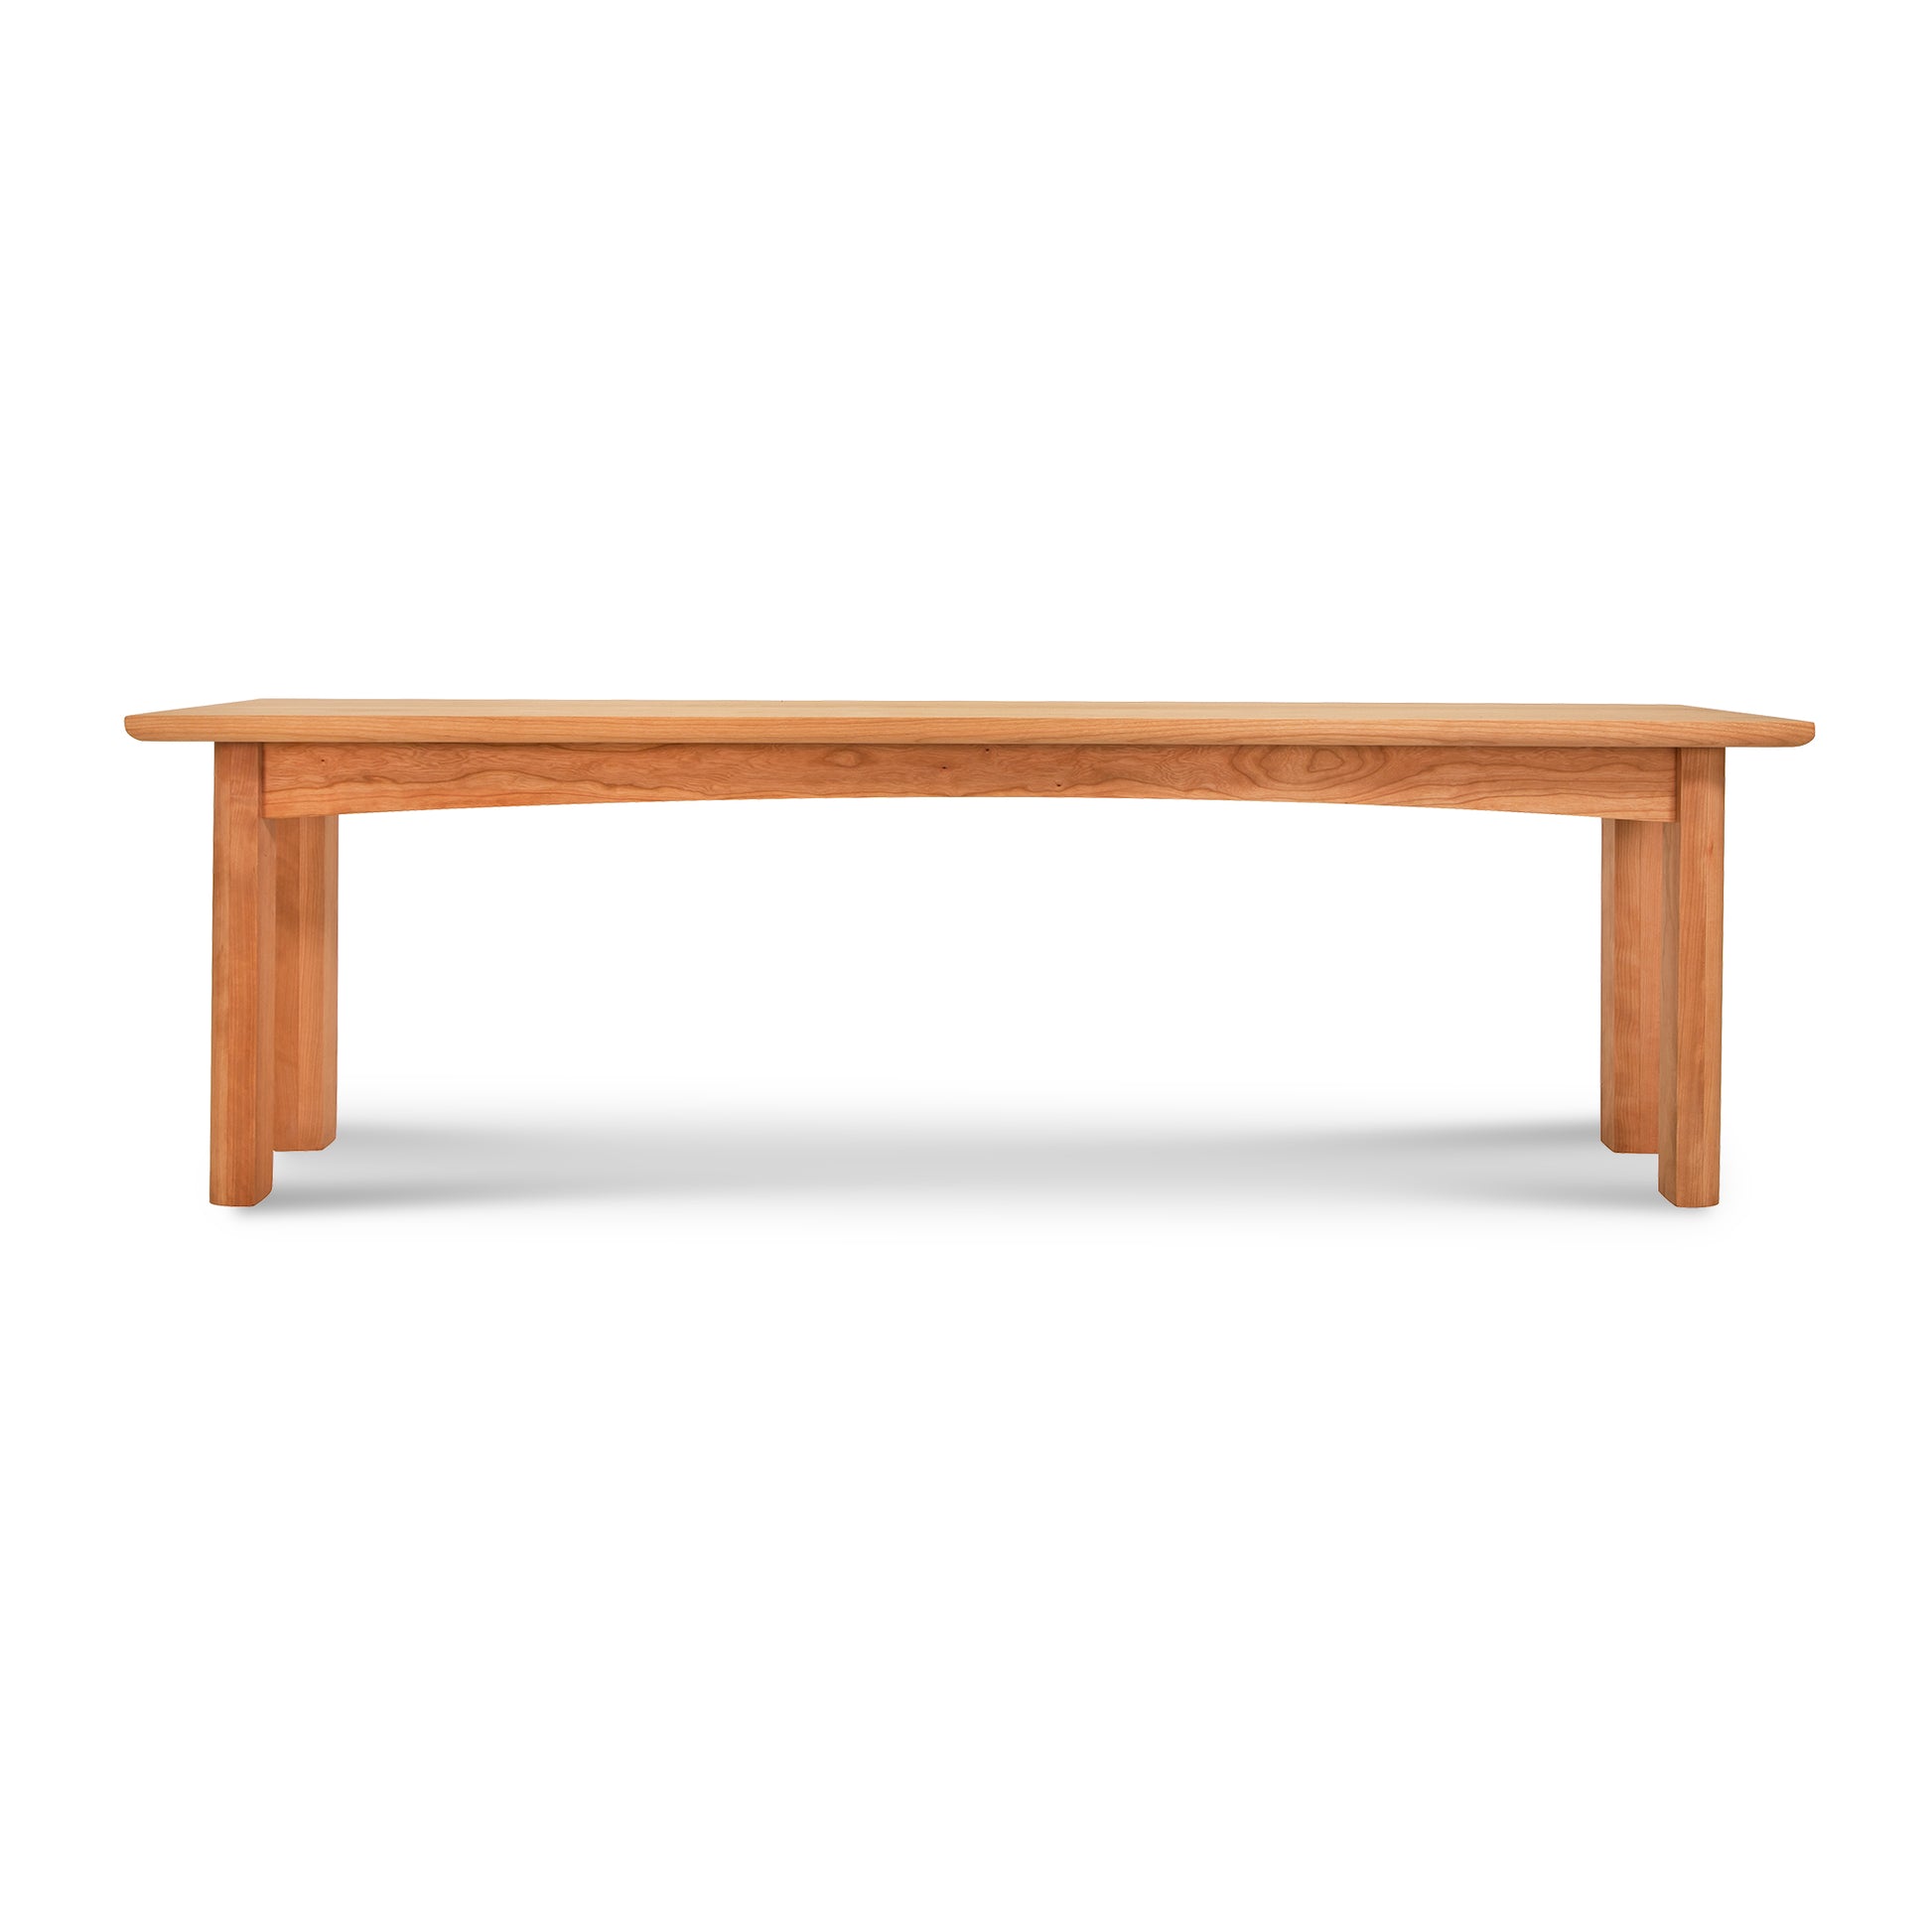 A Heartwood Shaker Bench by Vermont Furniture Designs isolated on a white background.